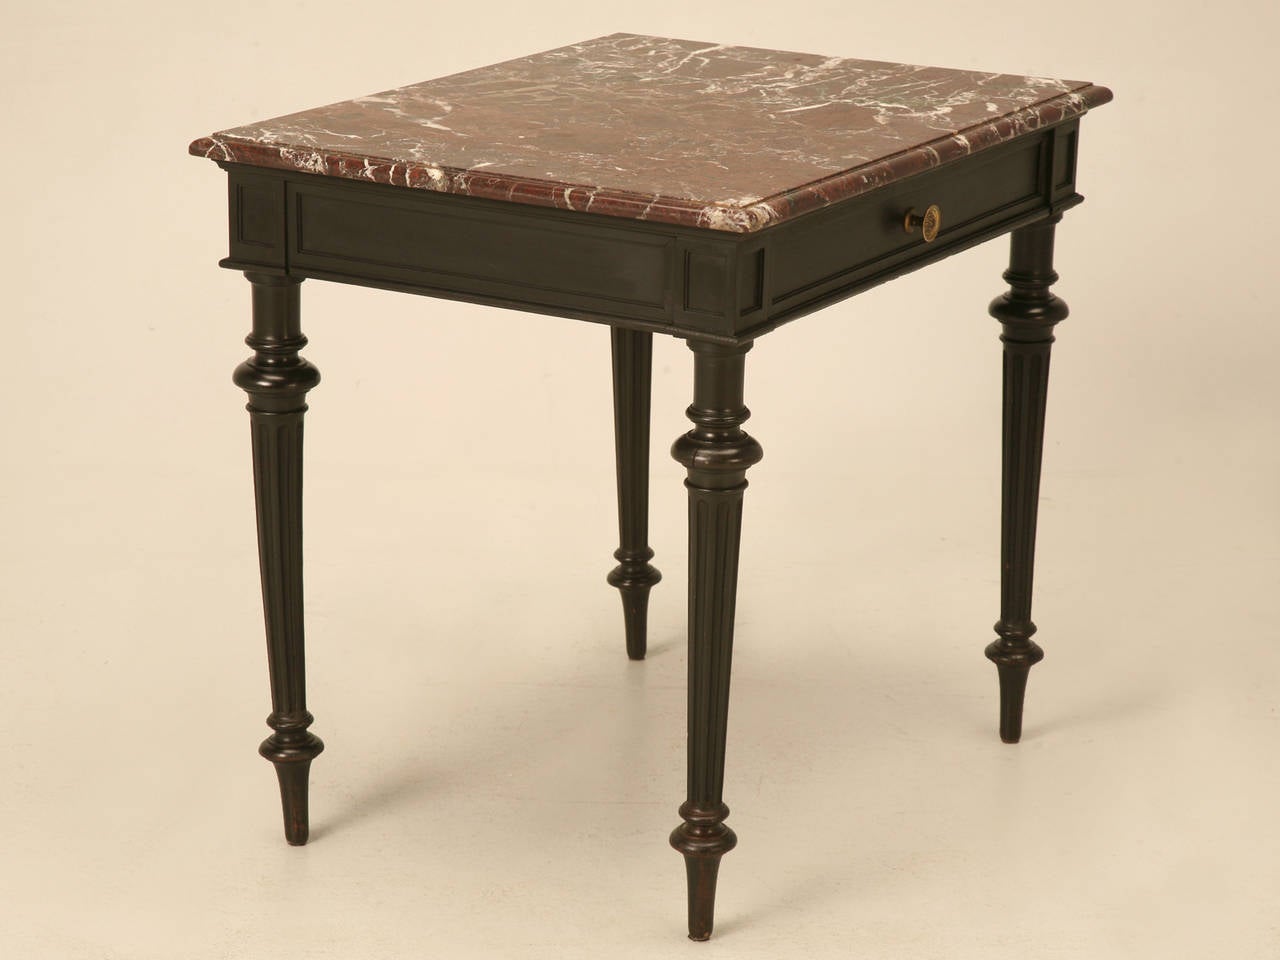 Unusual scale Napoleon III end table, or small writing desk, circa 1880-1900. The black is an original ebonized finish applied over 100 years ago and lets a slight glimmer of the brown of the oak peek through. Beautifully hand dove-tailed drawers,